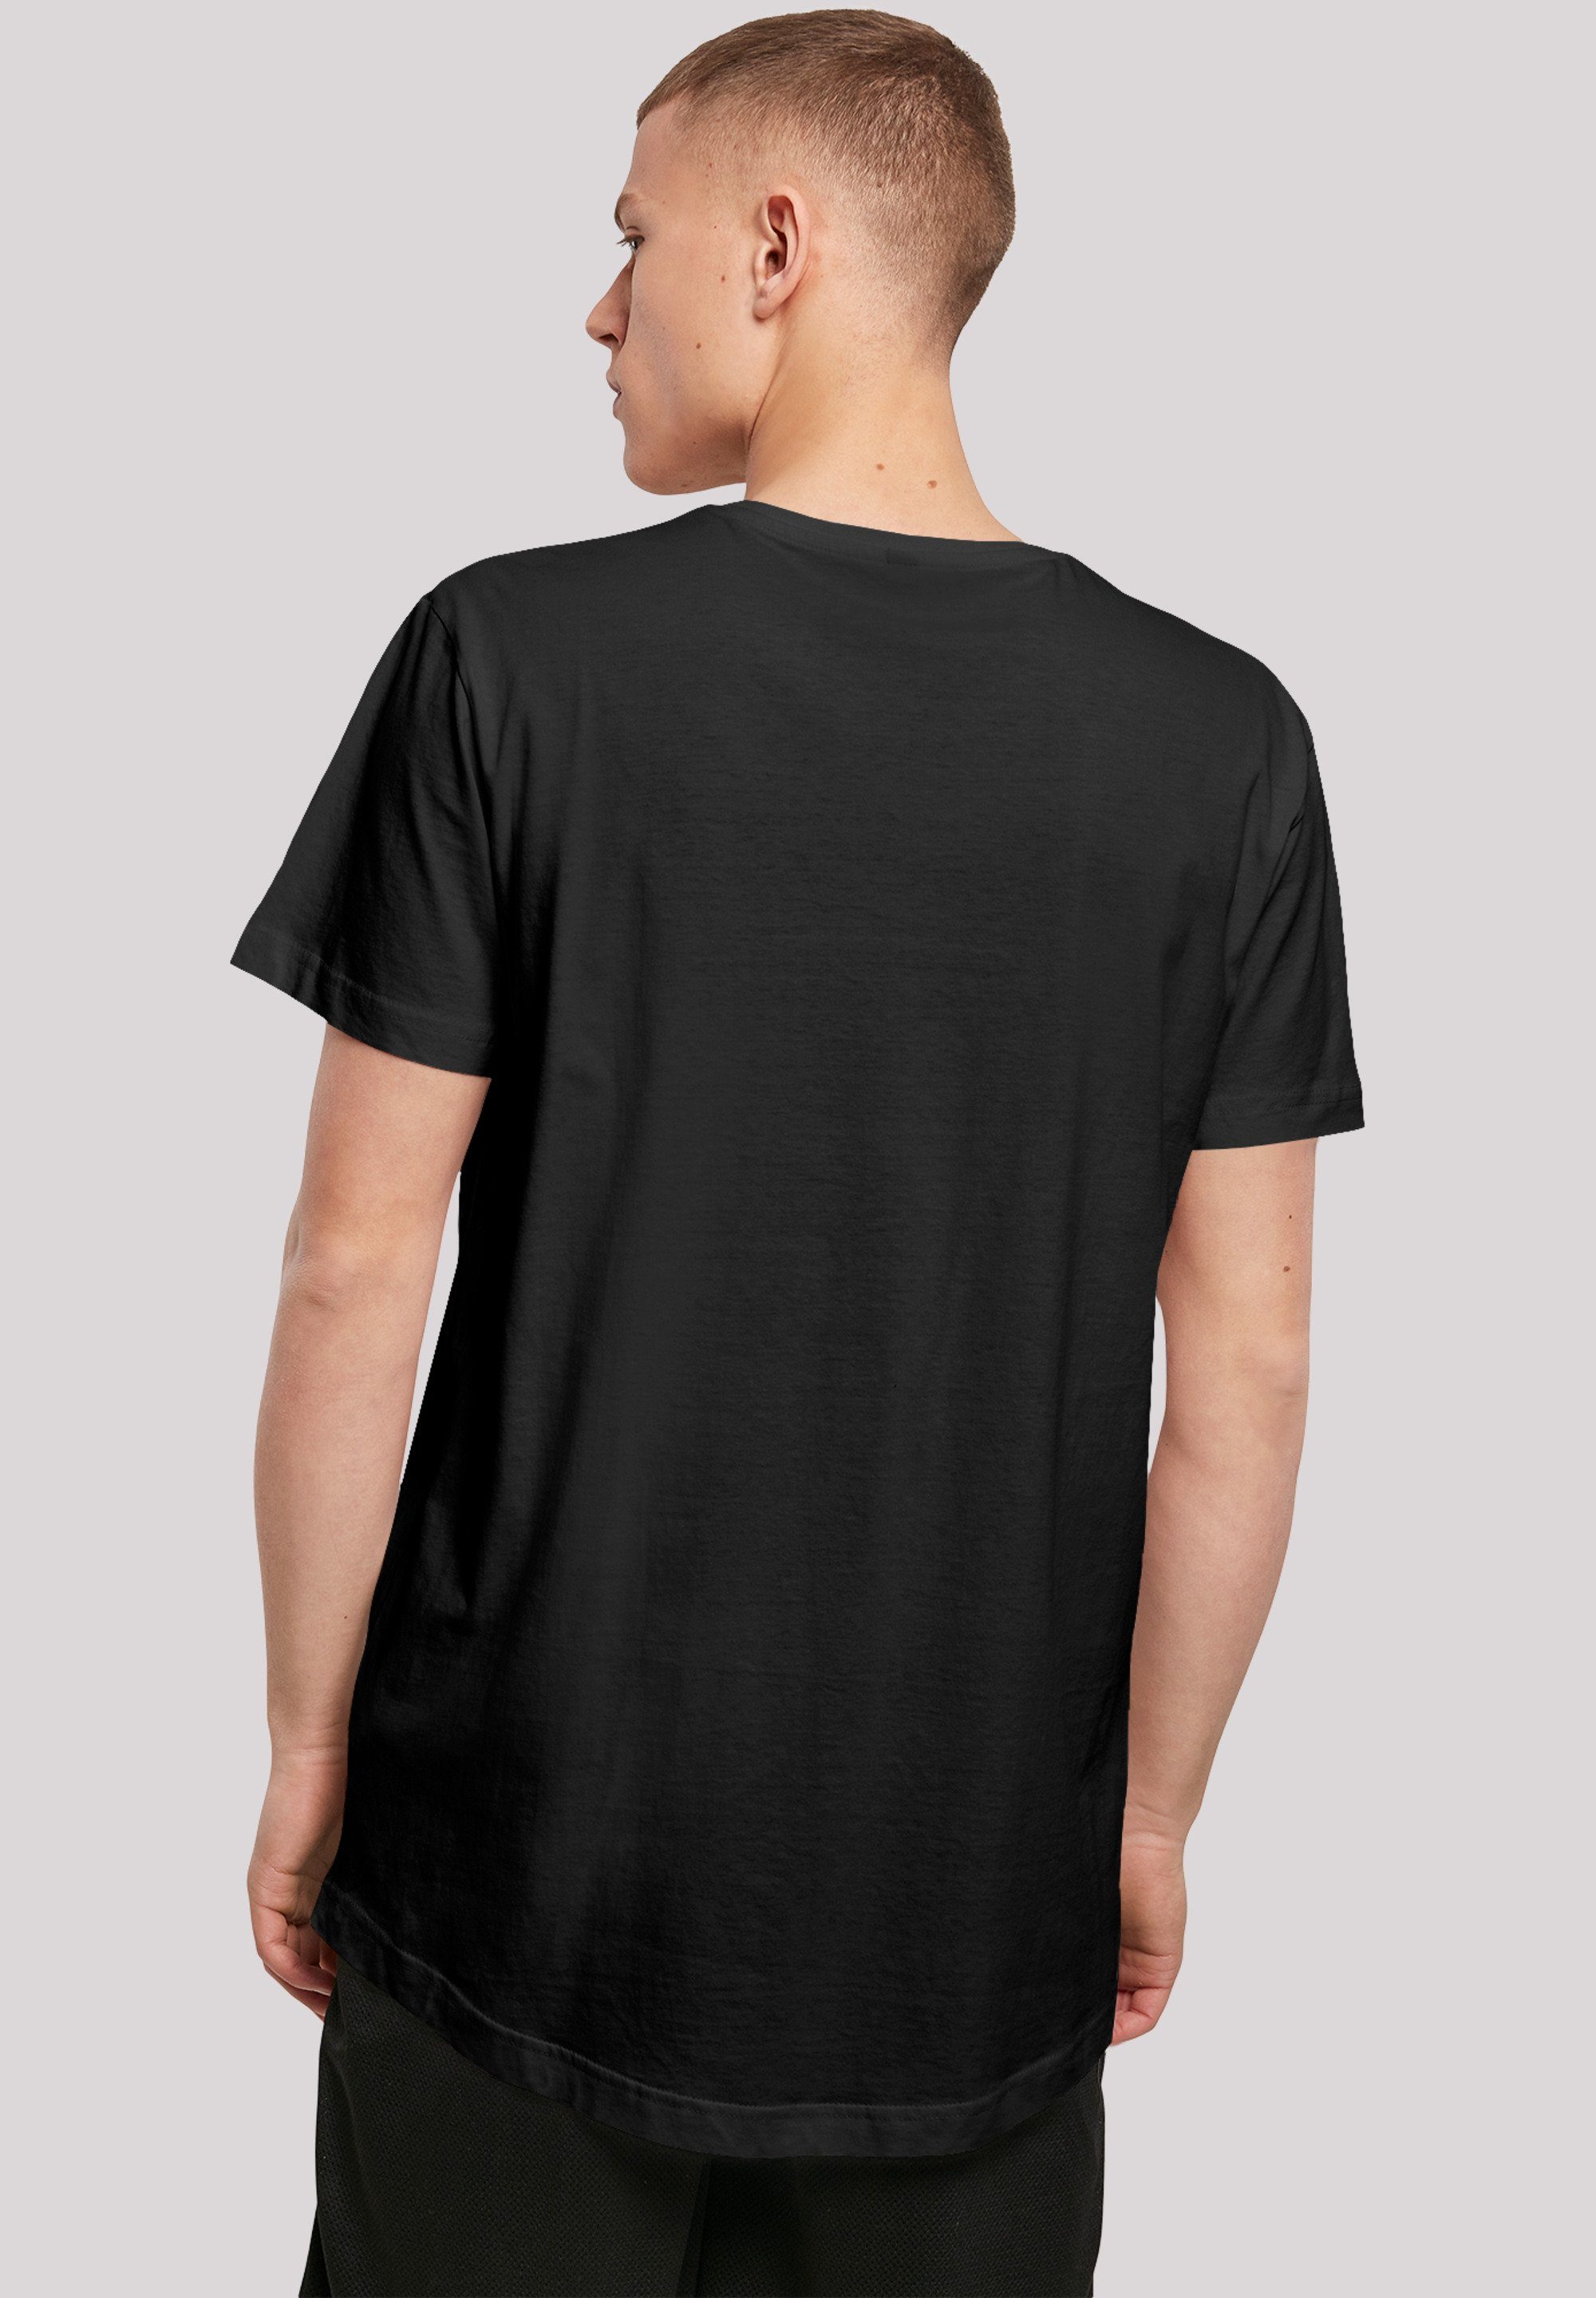 Martian F4NT4STIC black Shaped with (1-tlg) Tee Marvin The Long Face Herren Kurzarmshirt